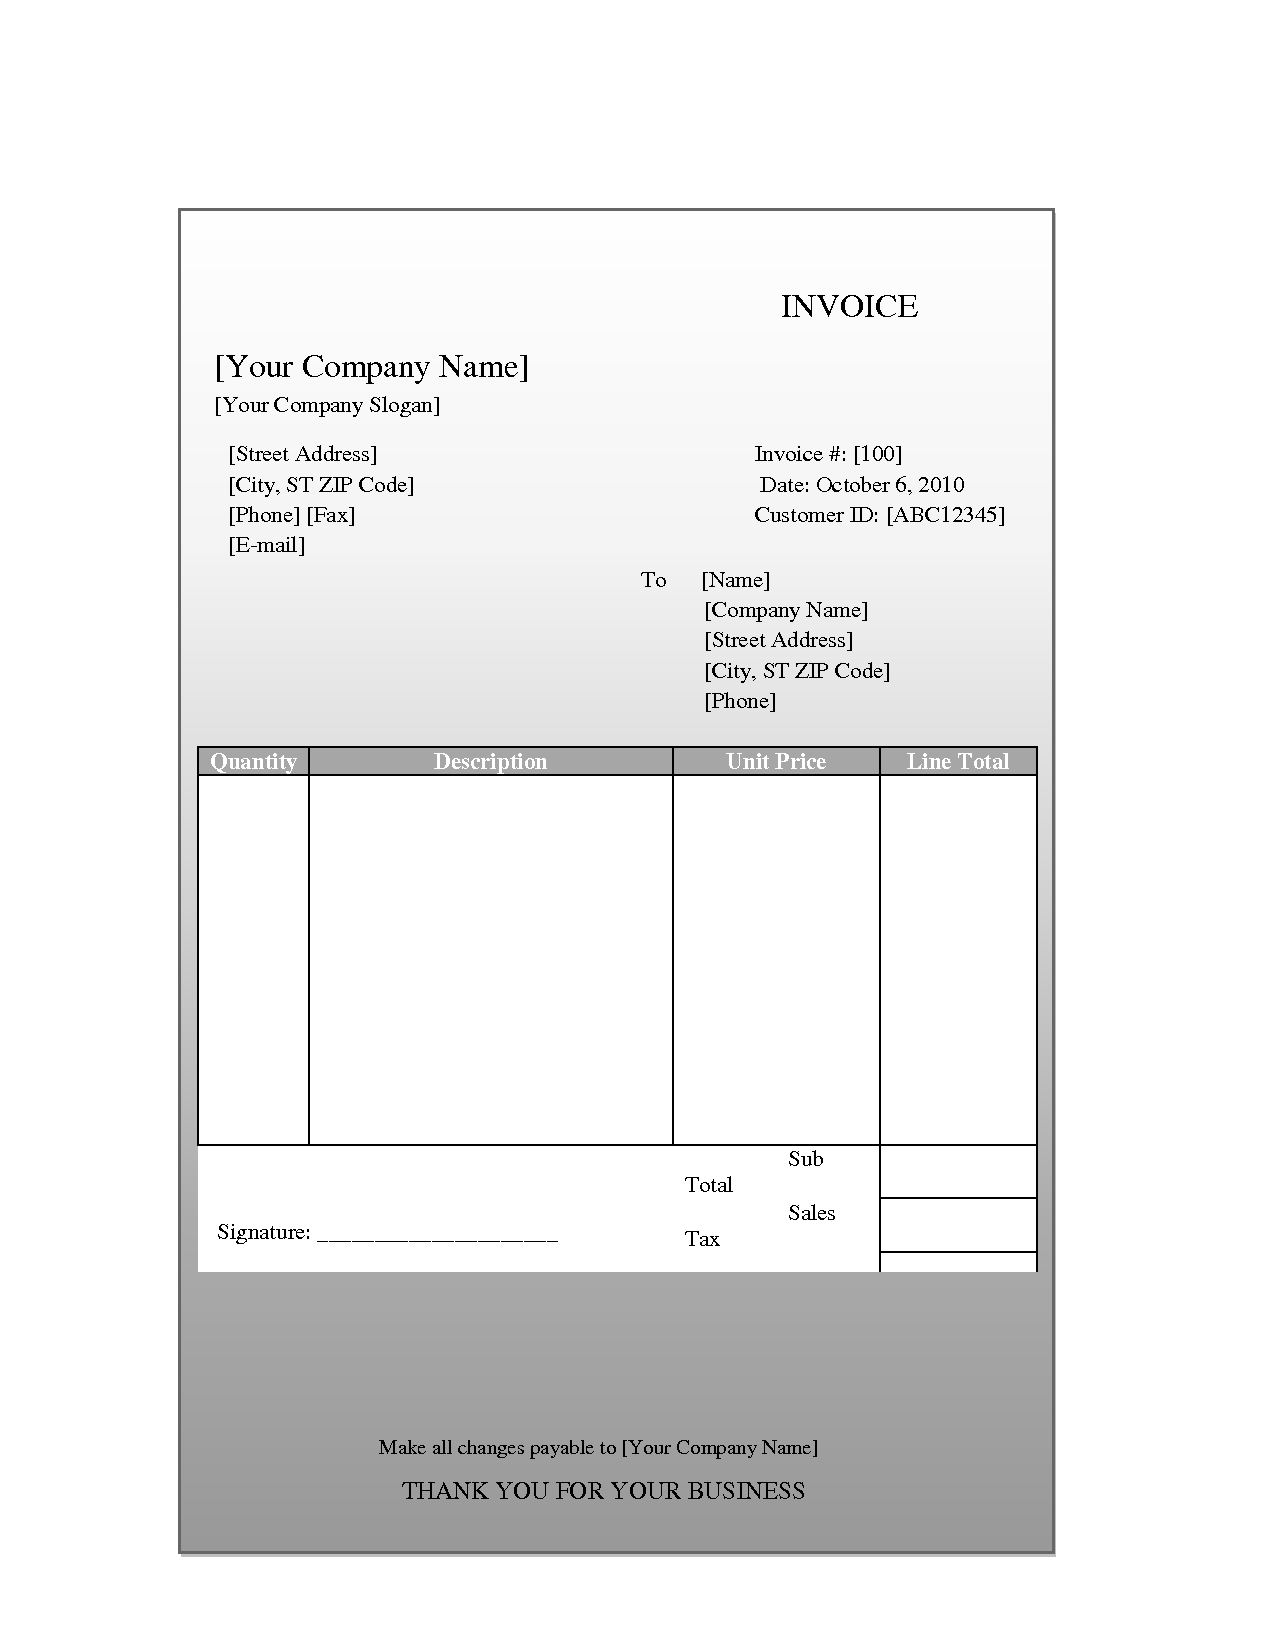 18 Online Blank Invoice Forms Printable for Ms Word with Blank Invoice Forms Printable